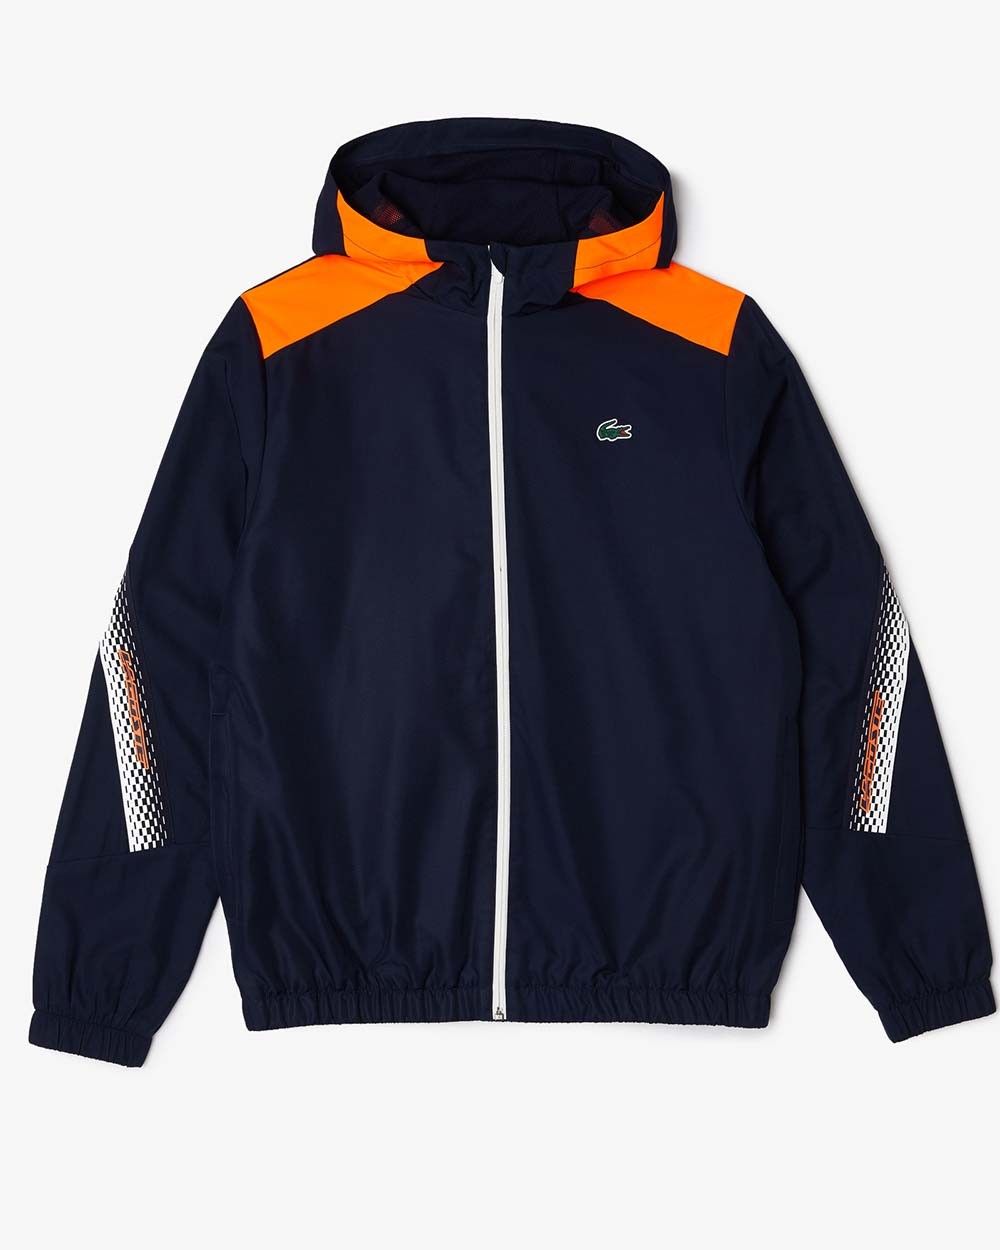 LACOSTE BH5045-00 - Jacket